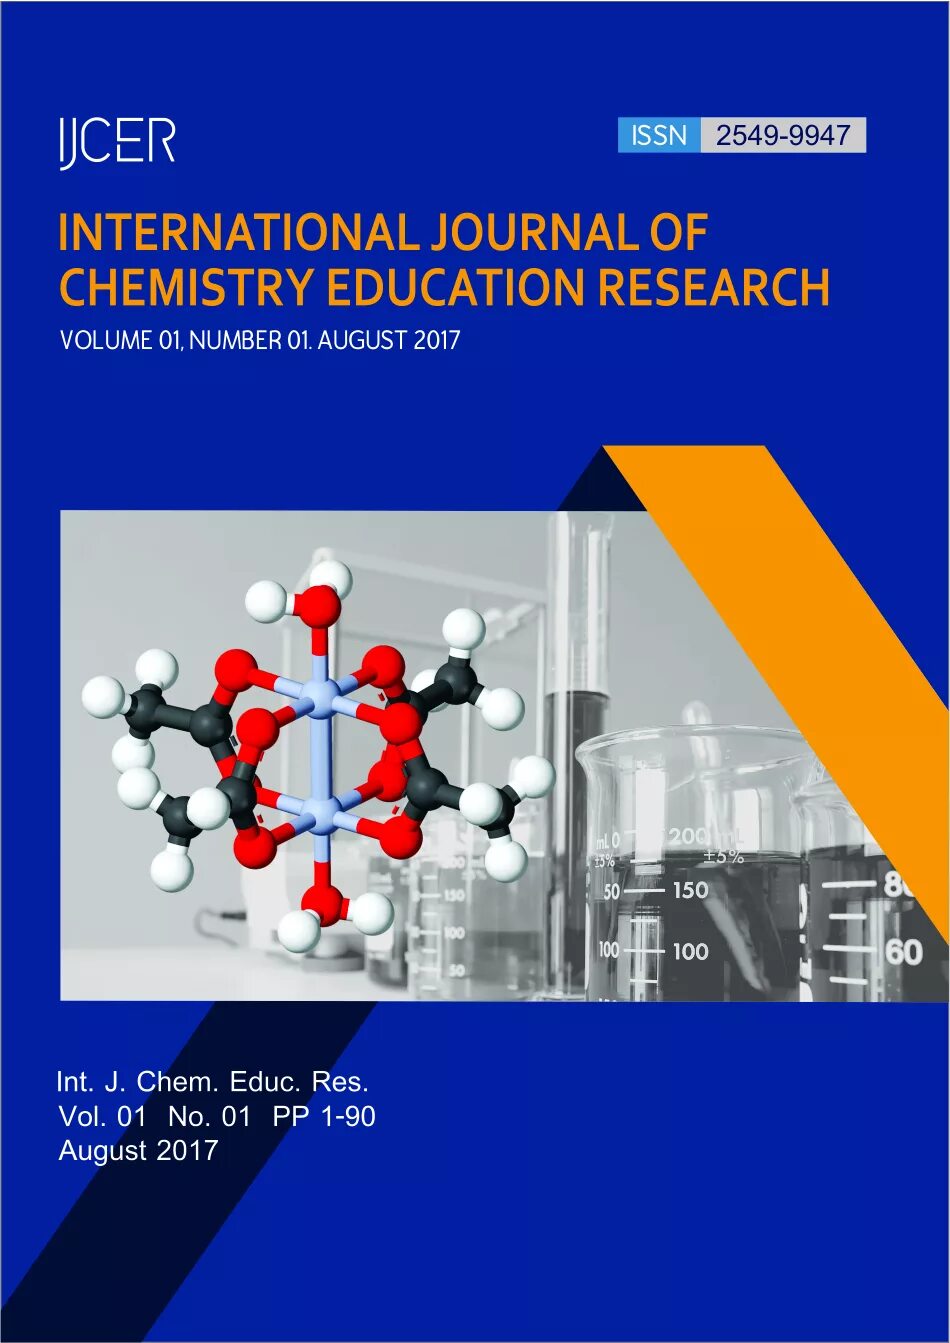 International Journal of Chemistry. Journal of Chemical Education. Journal of the American Chemical Society. International Journal of Education and research.